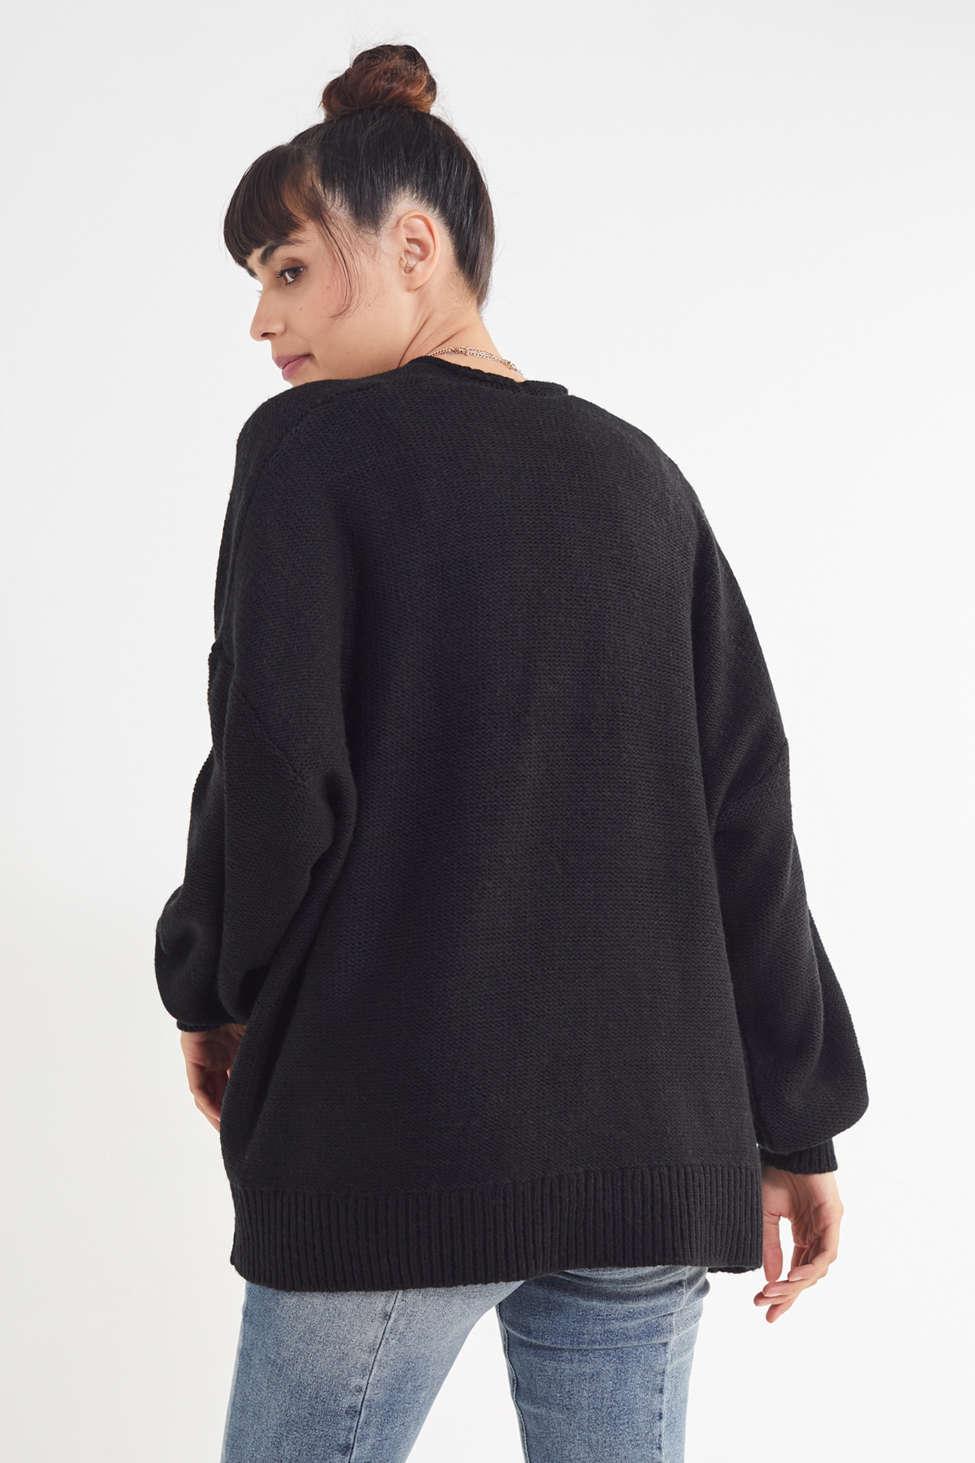 Urban Outfitters Uo Colie Oversized Open-front Cardigan in Black - Lyst